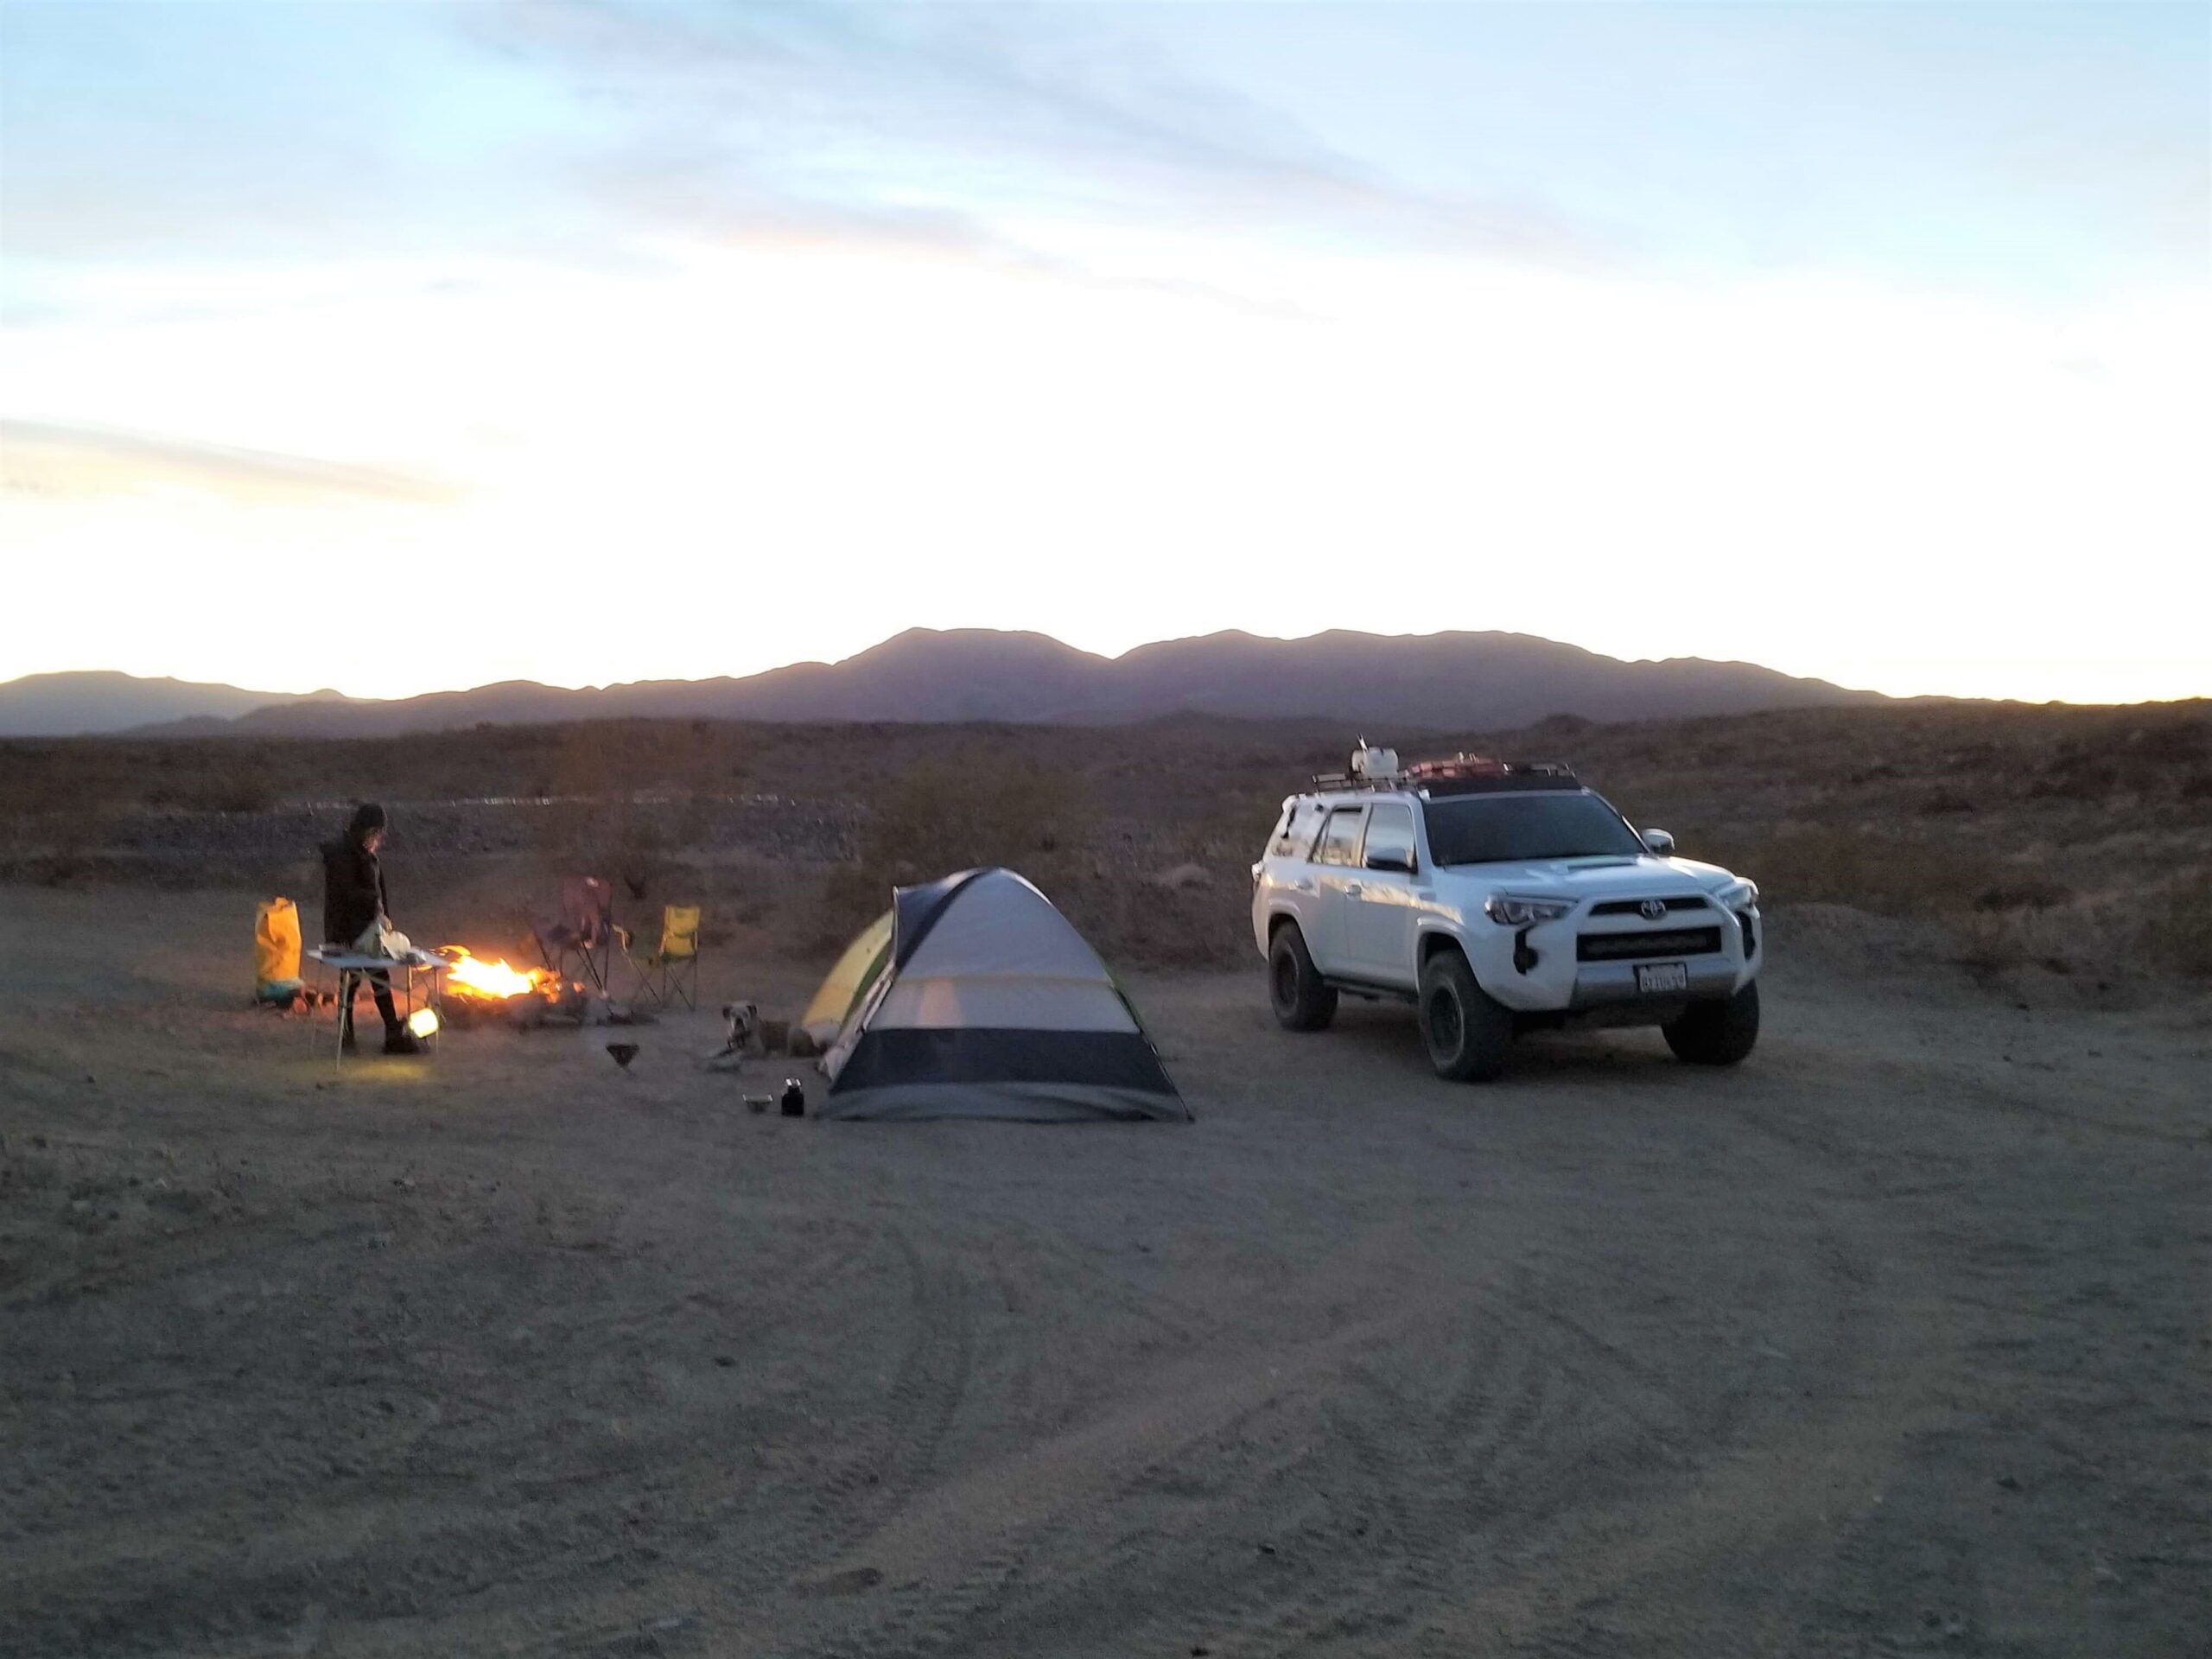 Lifted Toyota 4runner, tent, and campfire in the desert near Joshua Tree National Park